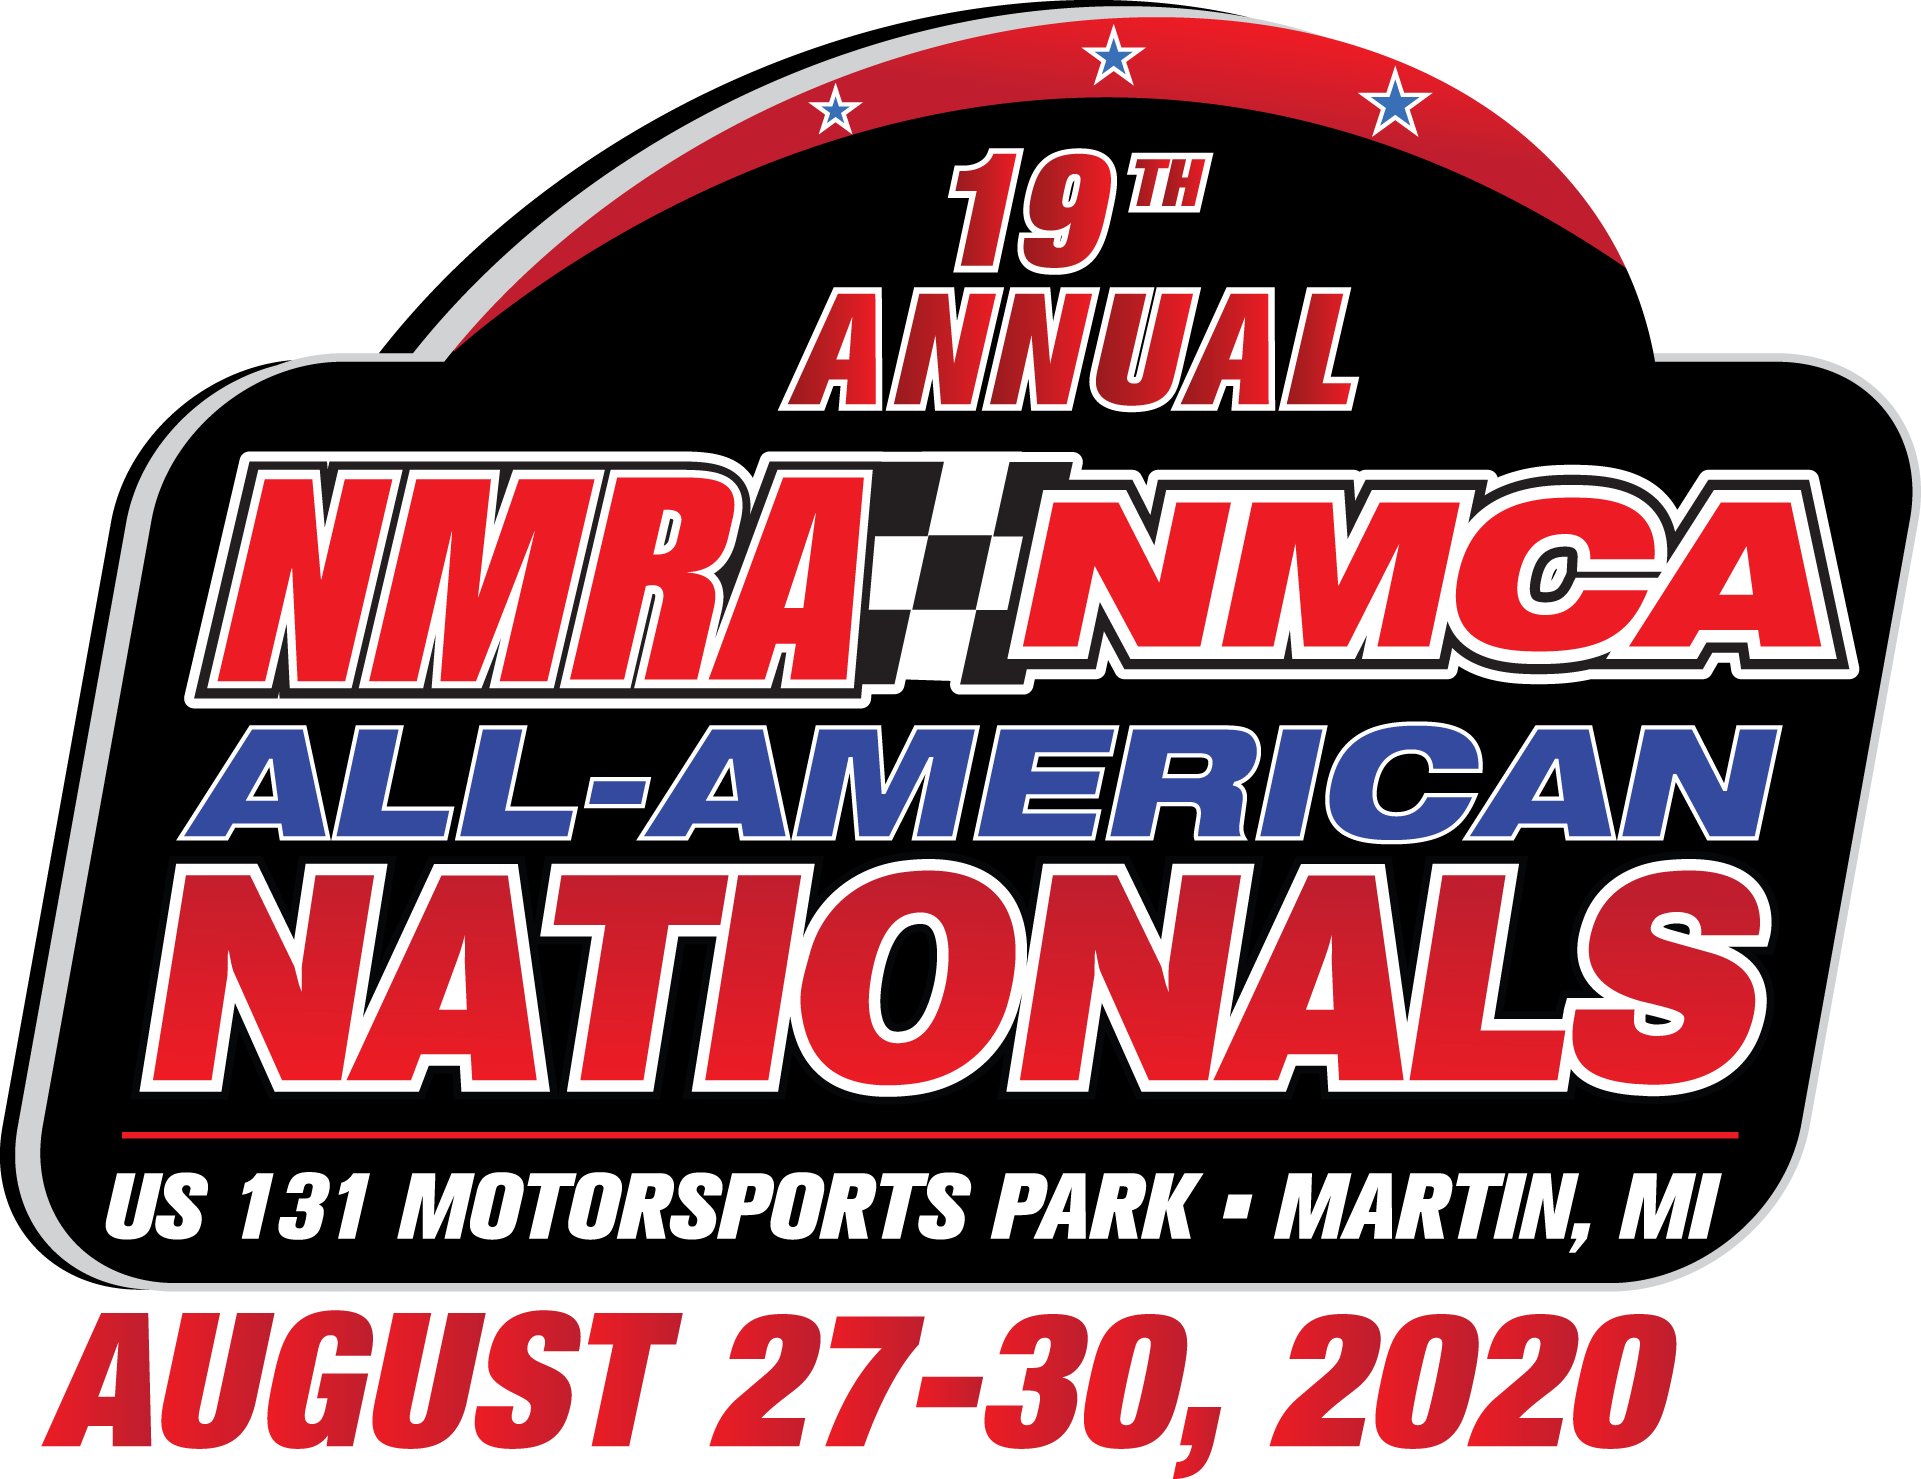 NMRA/NMCA ALLAMERICAN NATIONALS MOVES TO US 131 MOTORSPORTS PARK